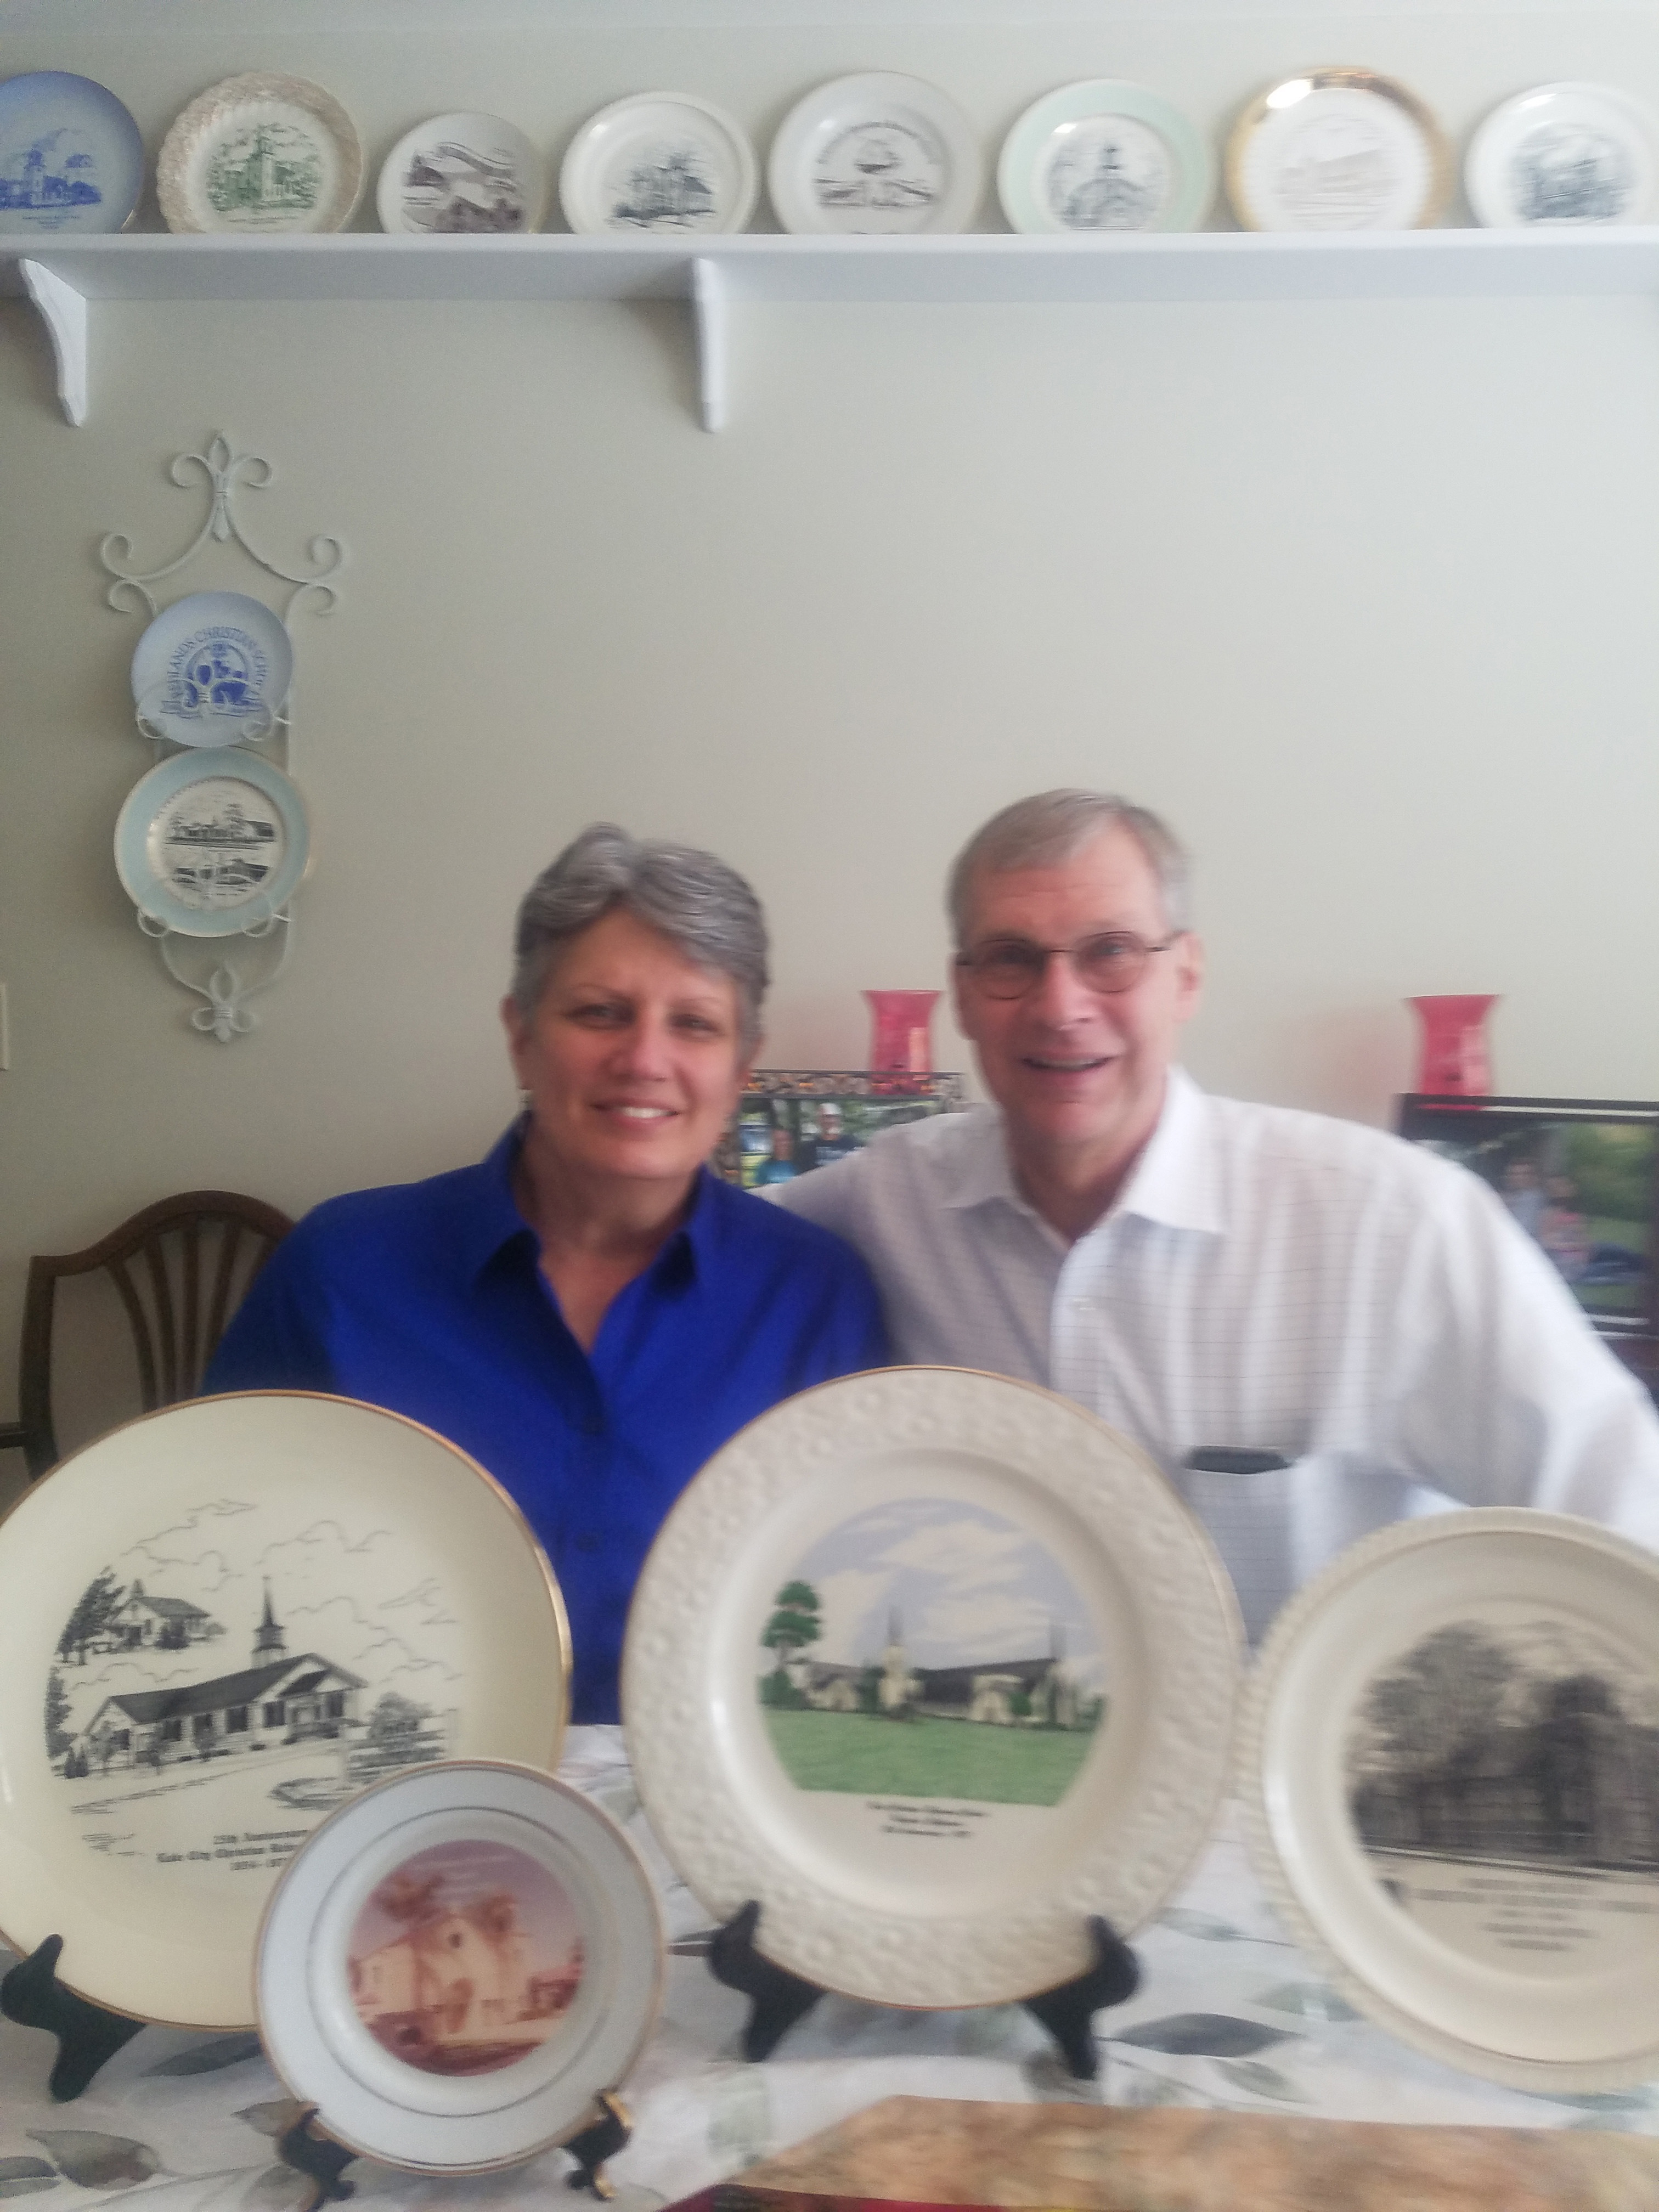 Commemorative Plates Commemorative Church Plates Find a Home at CRCNA Office | Christian  Reformed Church